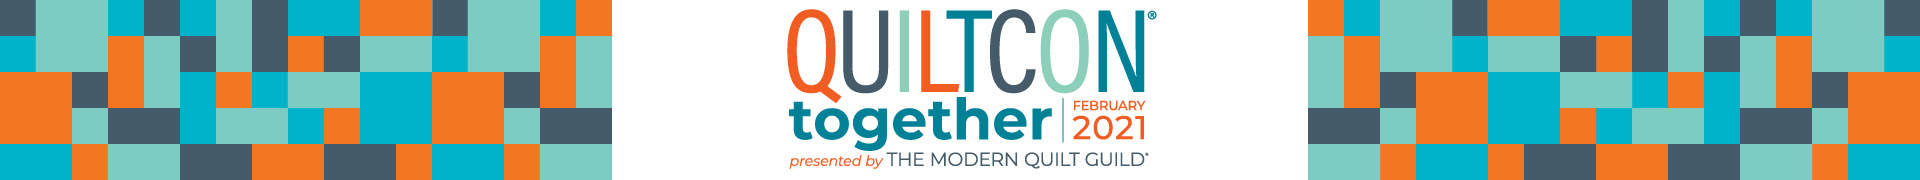 Quiltcon Together